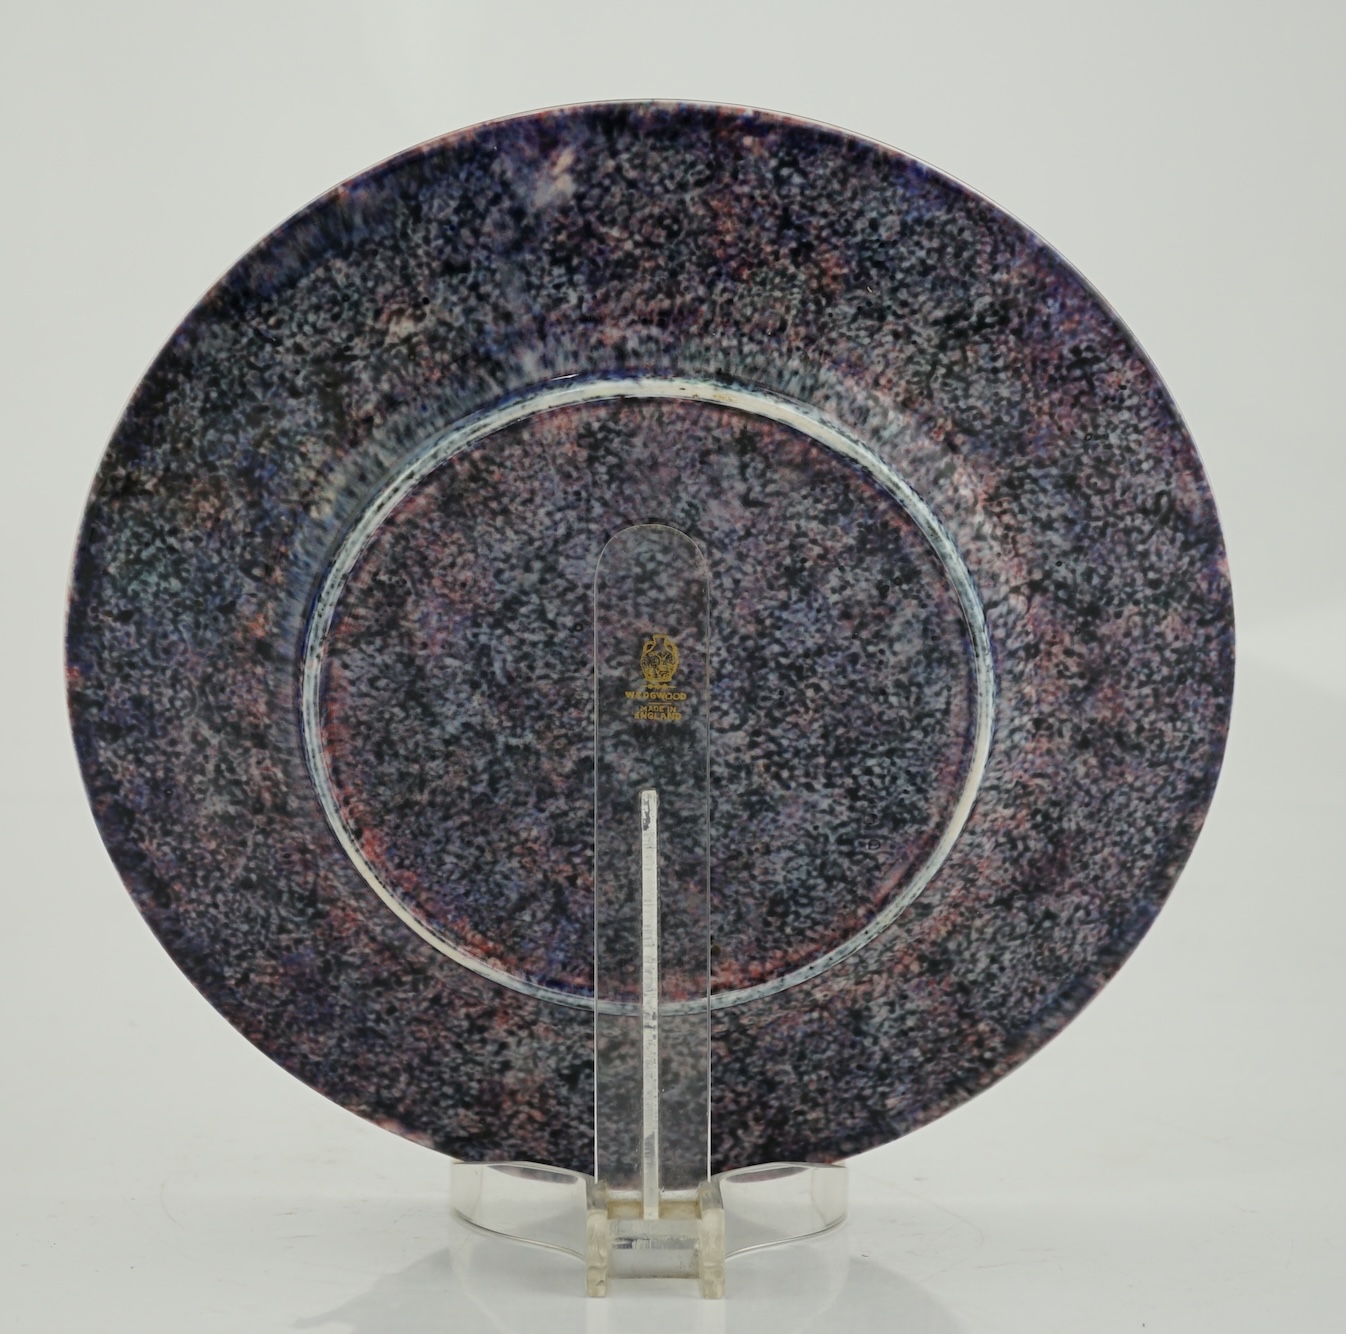 A Wedgwood Fairyland lustre ‘Lincoln’ plate, designed by Daisy Makeig Jones